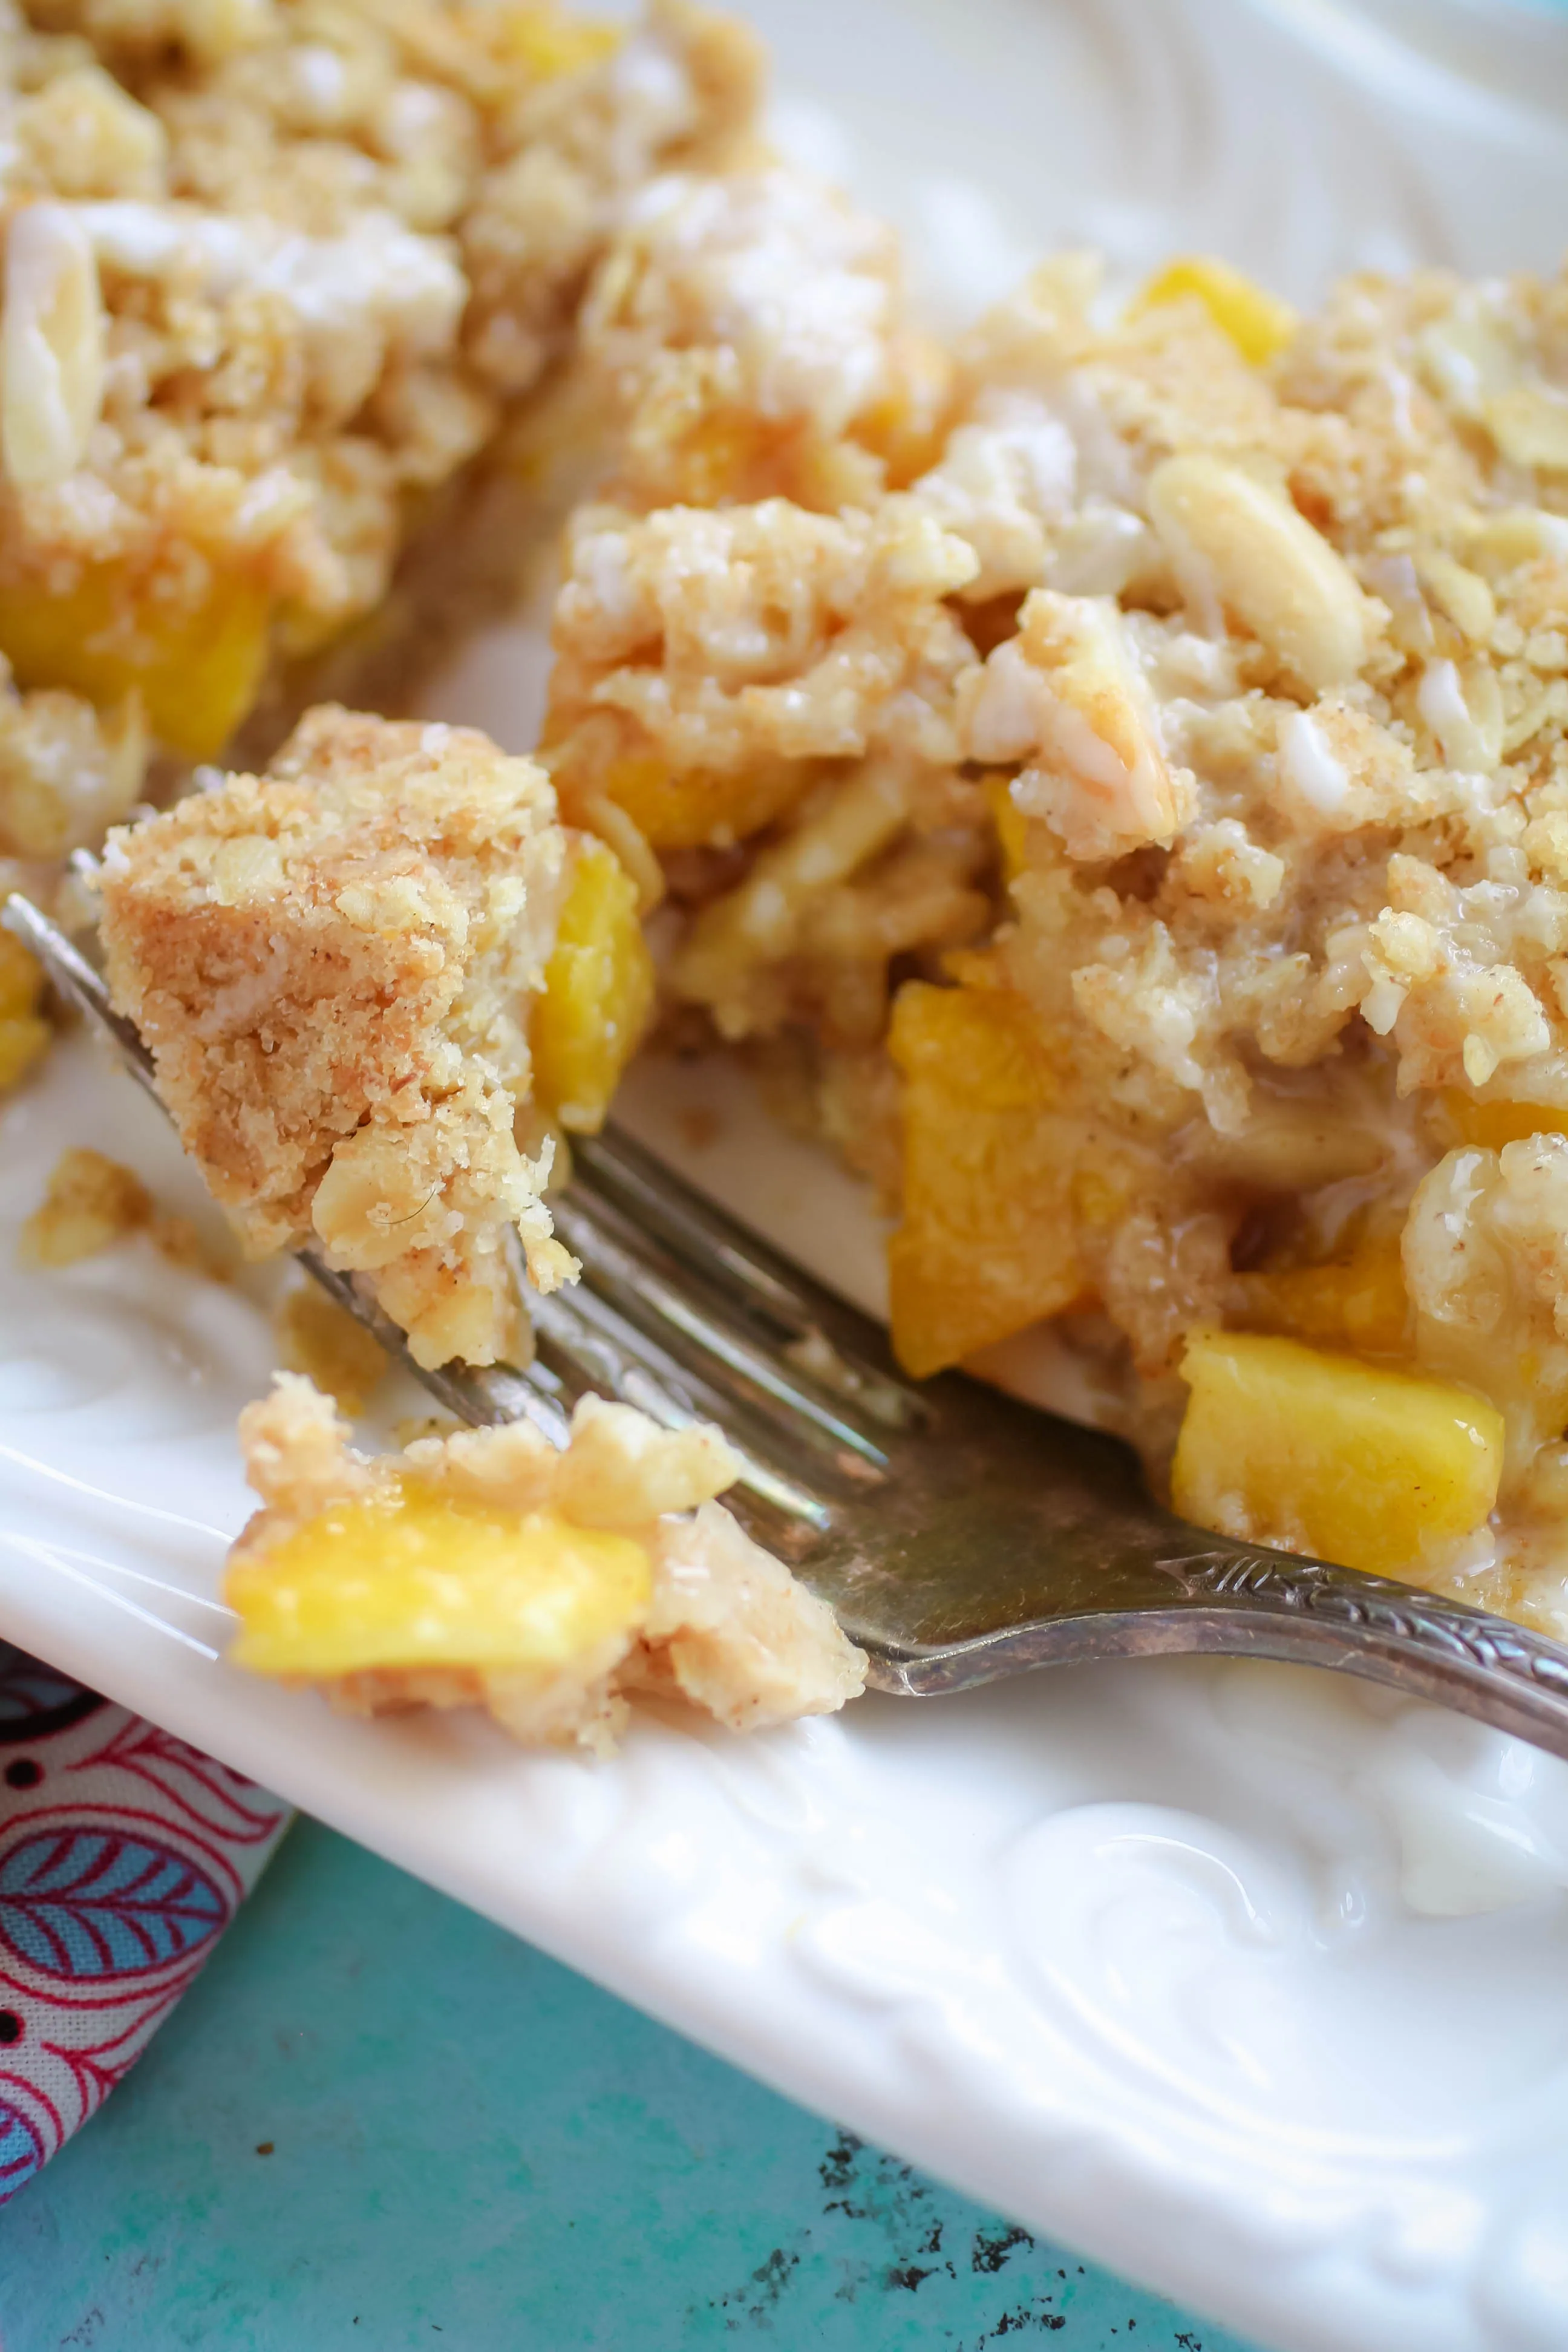 Peach Crumble Squares with Bourbon Glaze are a summertime treat to dig into. Enjoy these Peach Crumble Squares with Bourbon Glaze this summer while peaches are in season.